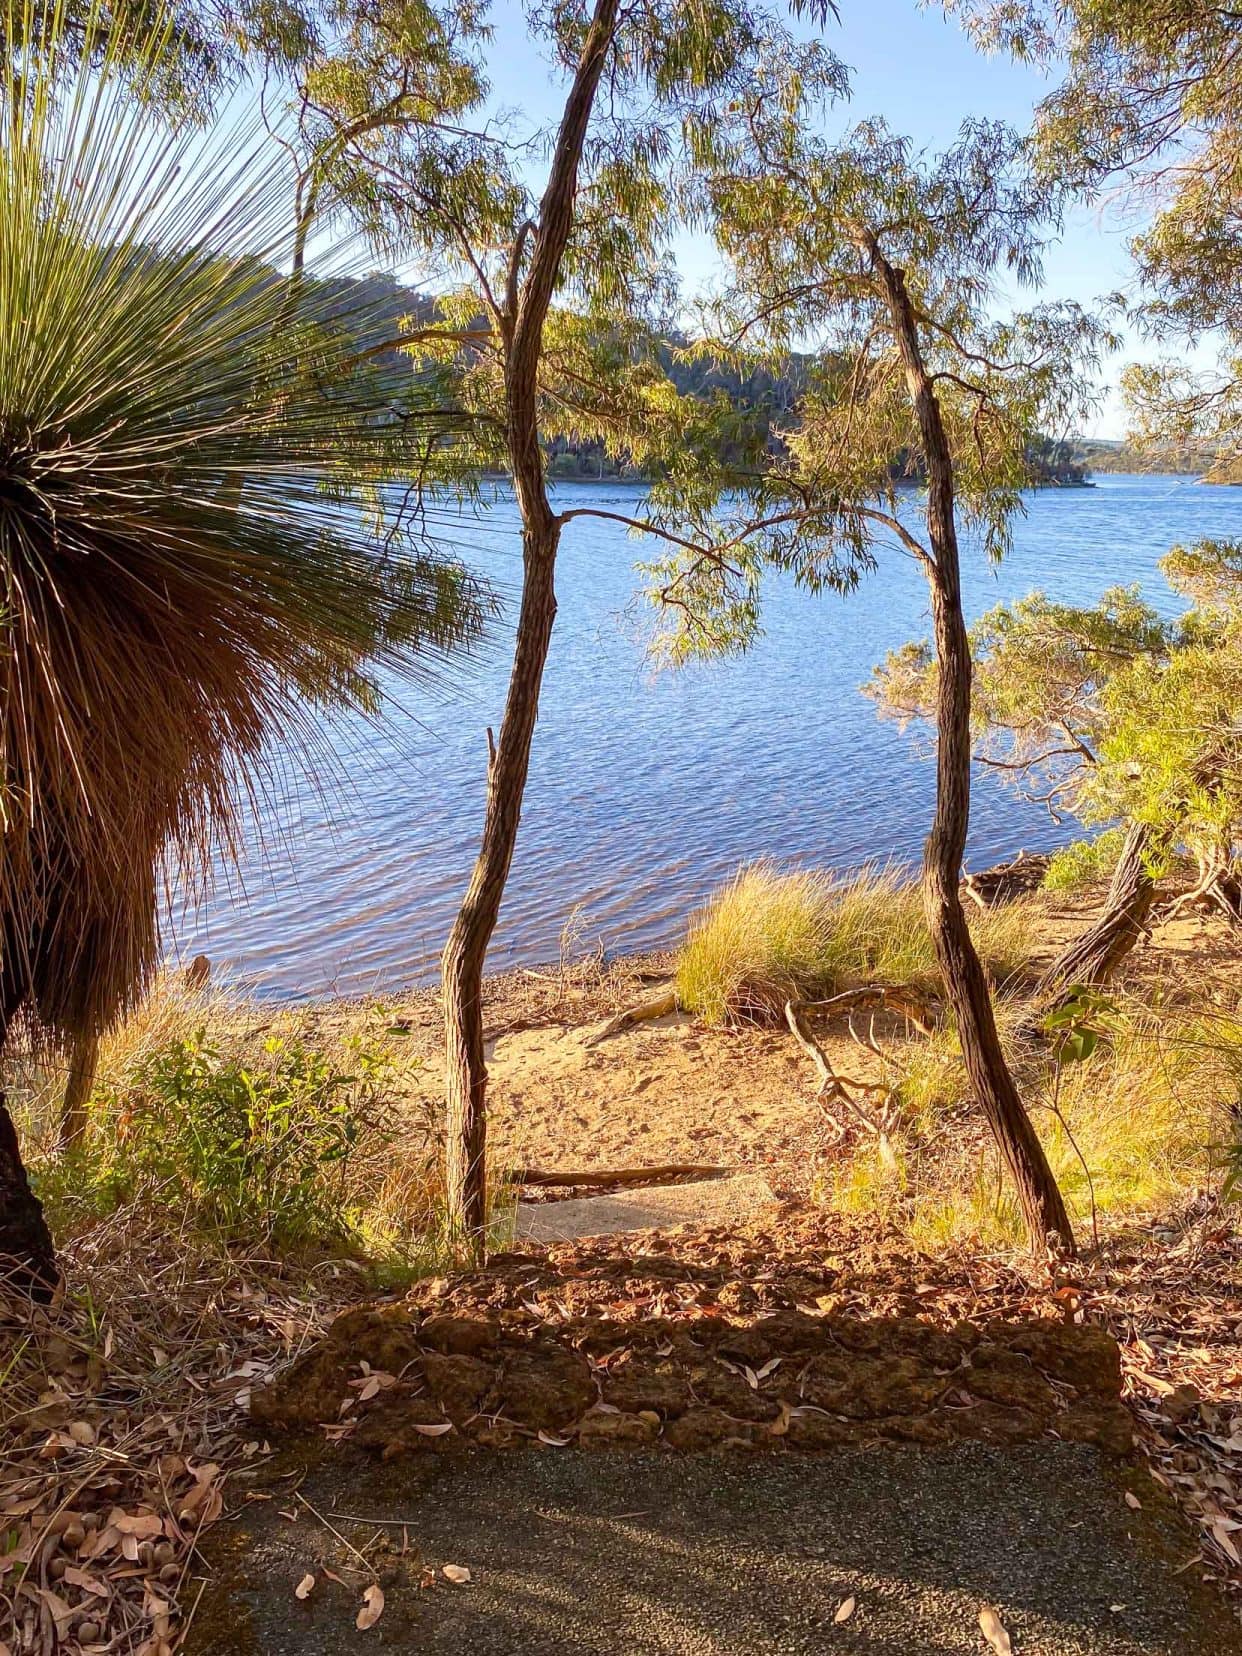 Lookout from the Channels grass tree on left with view of water and bush